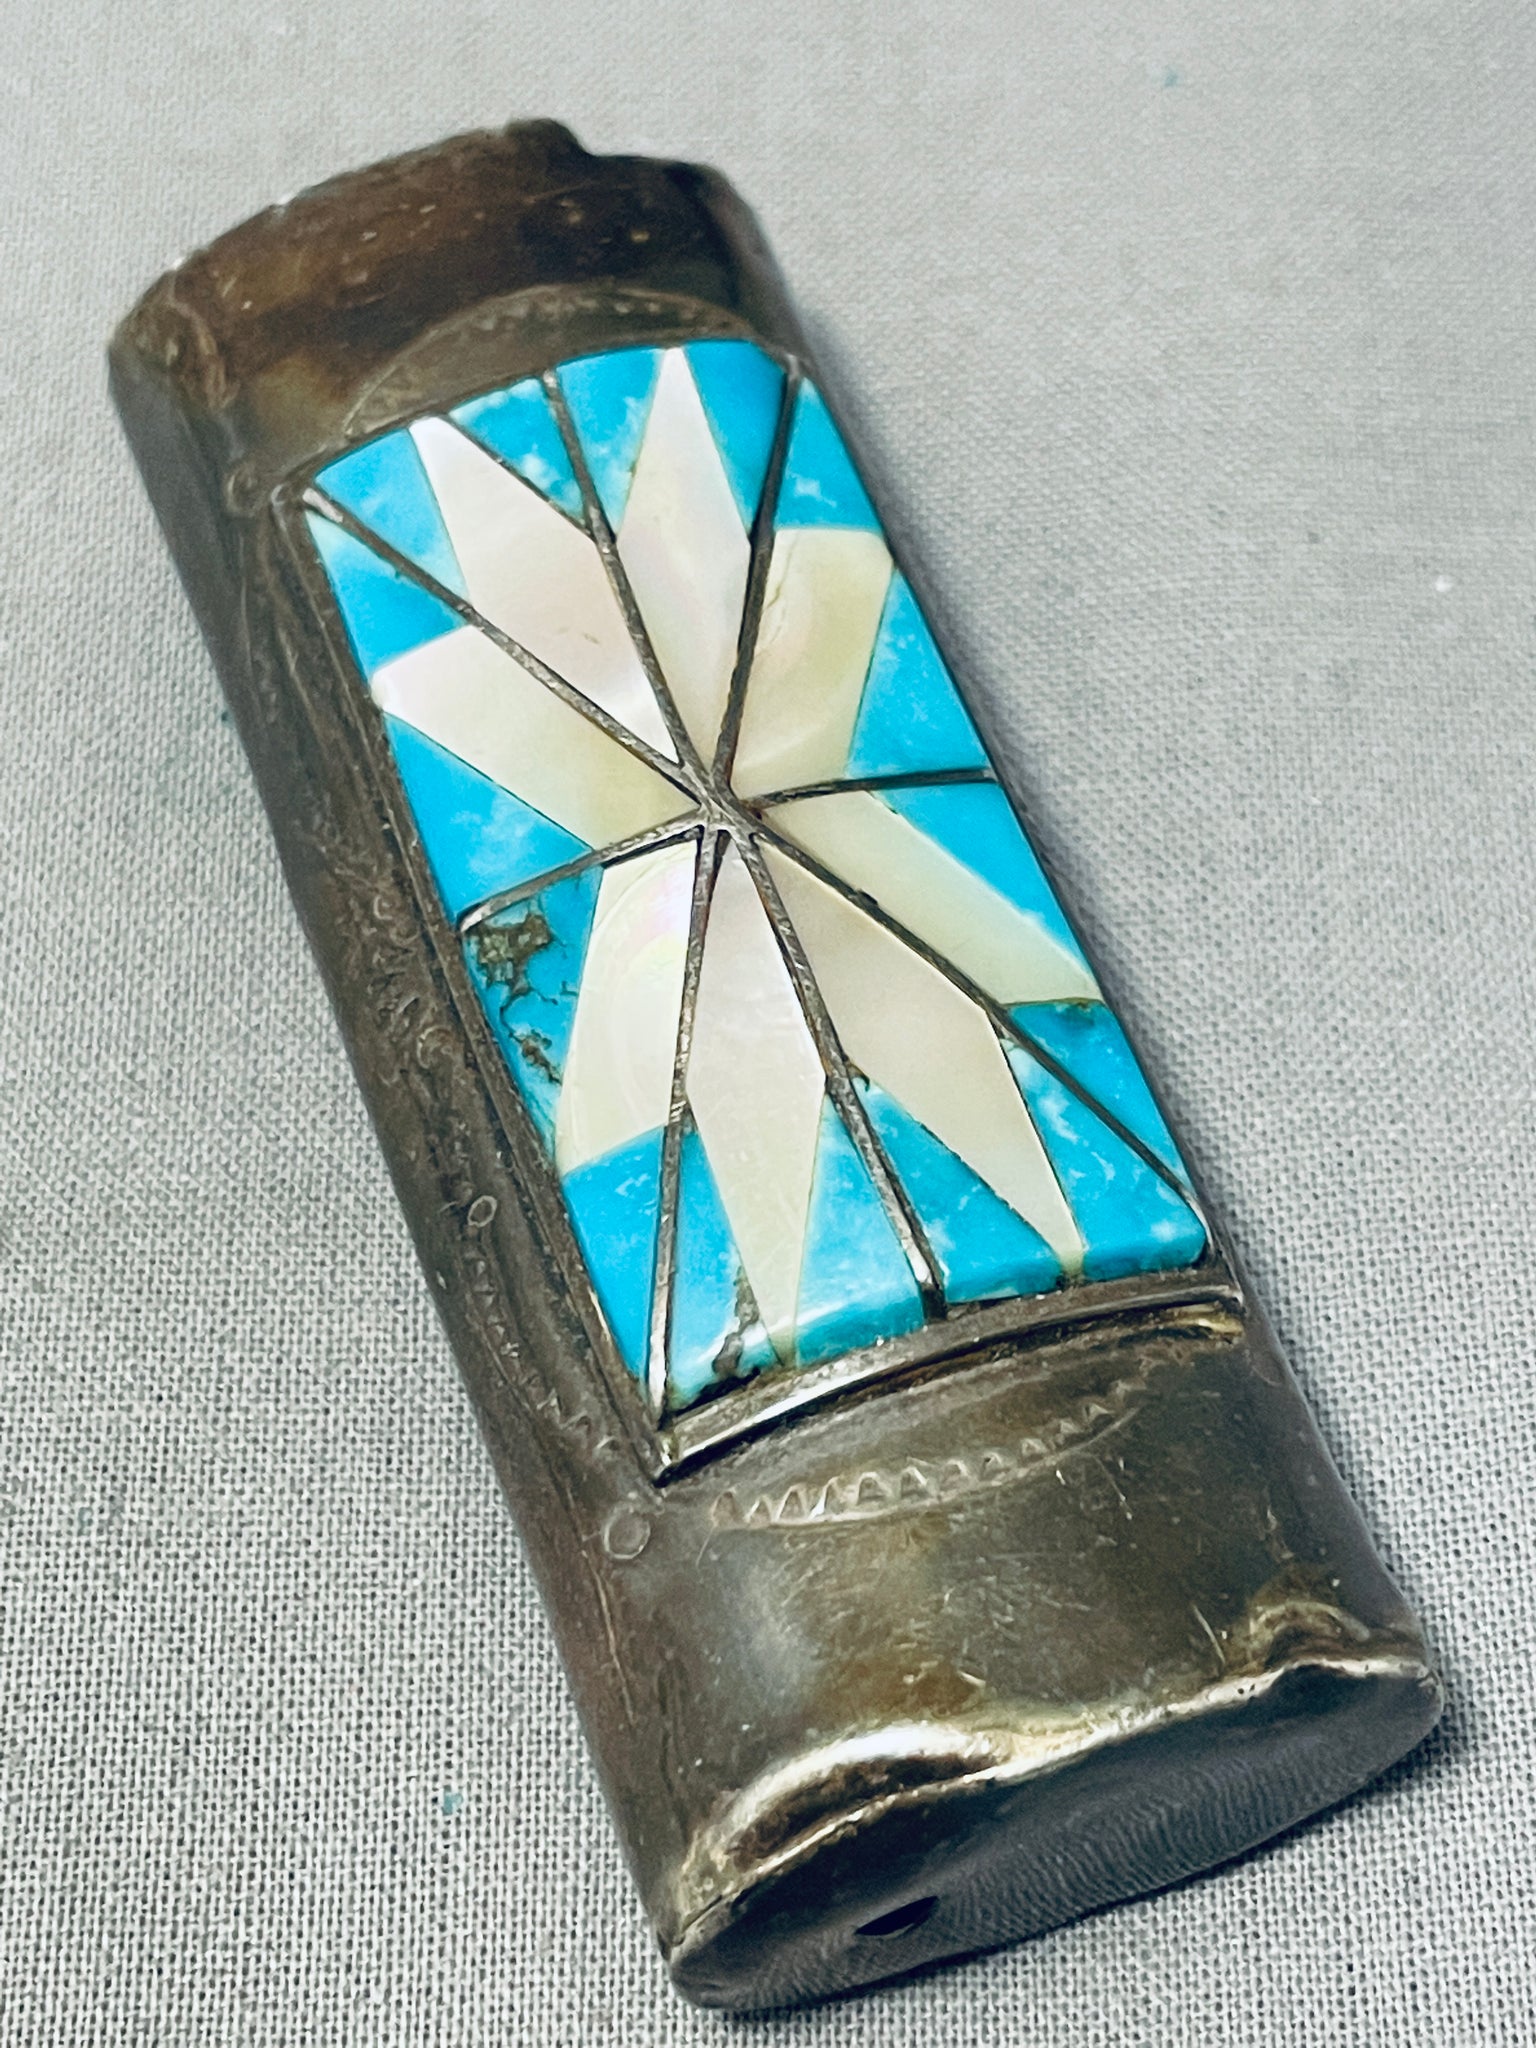 Native American Bic Lighter Cases